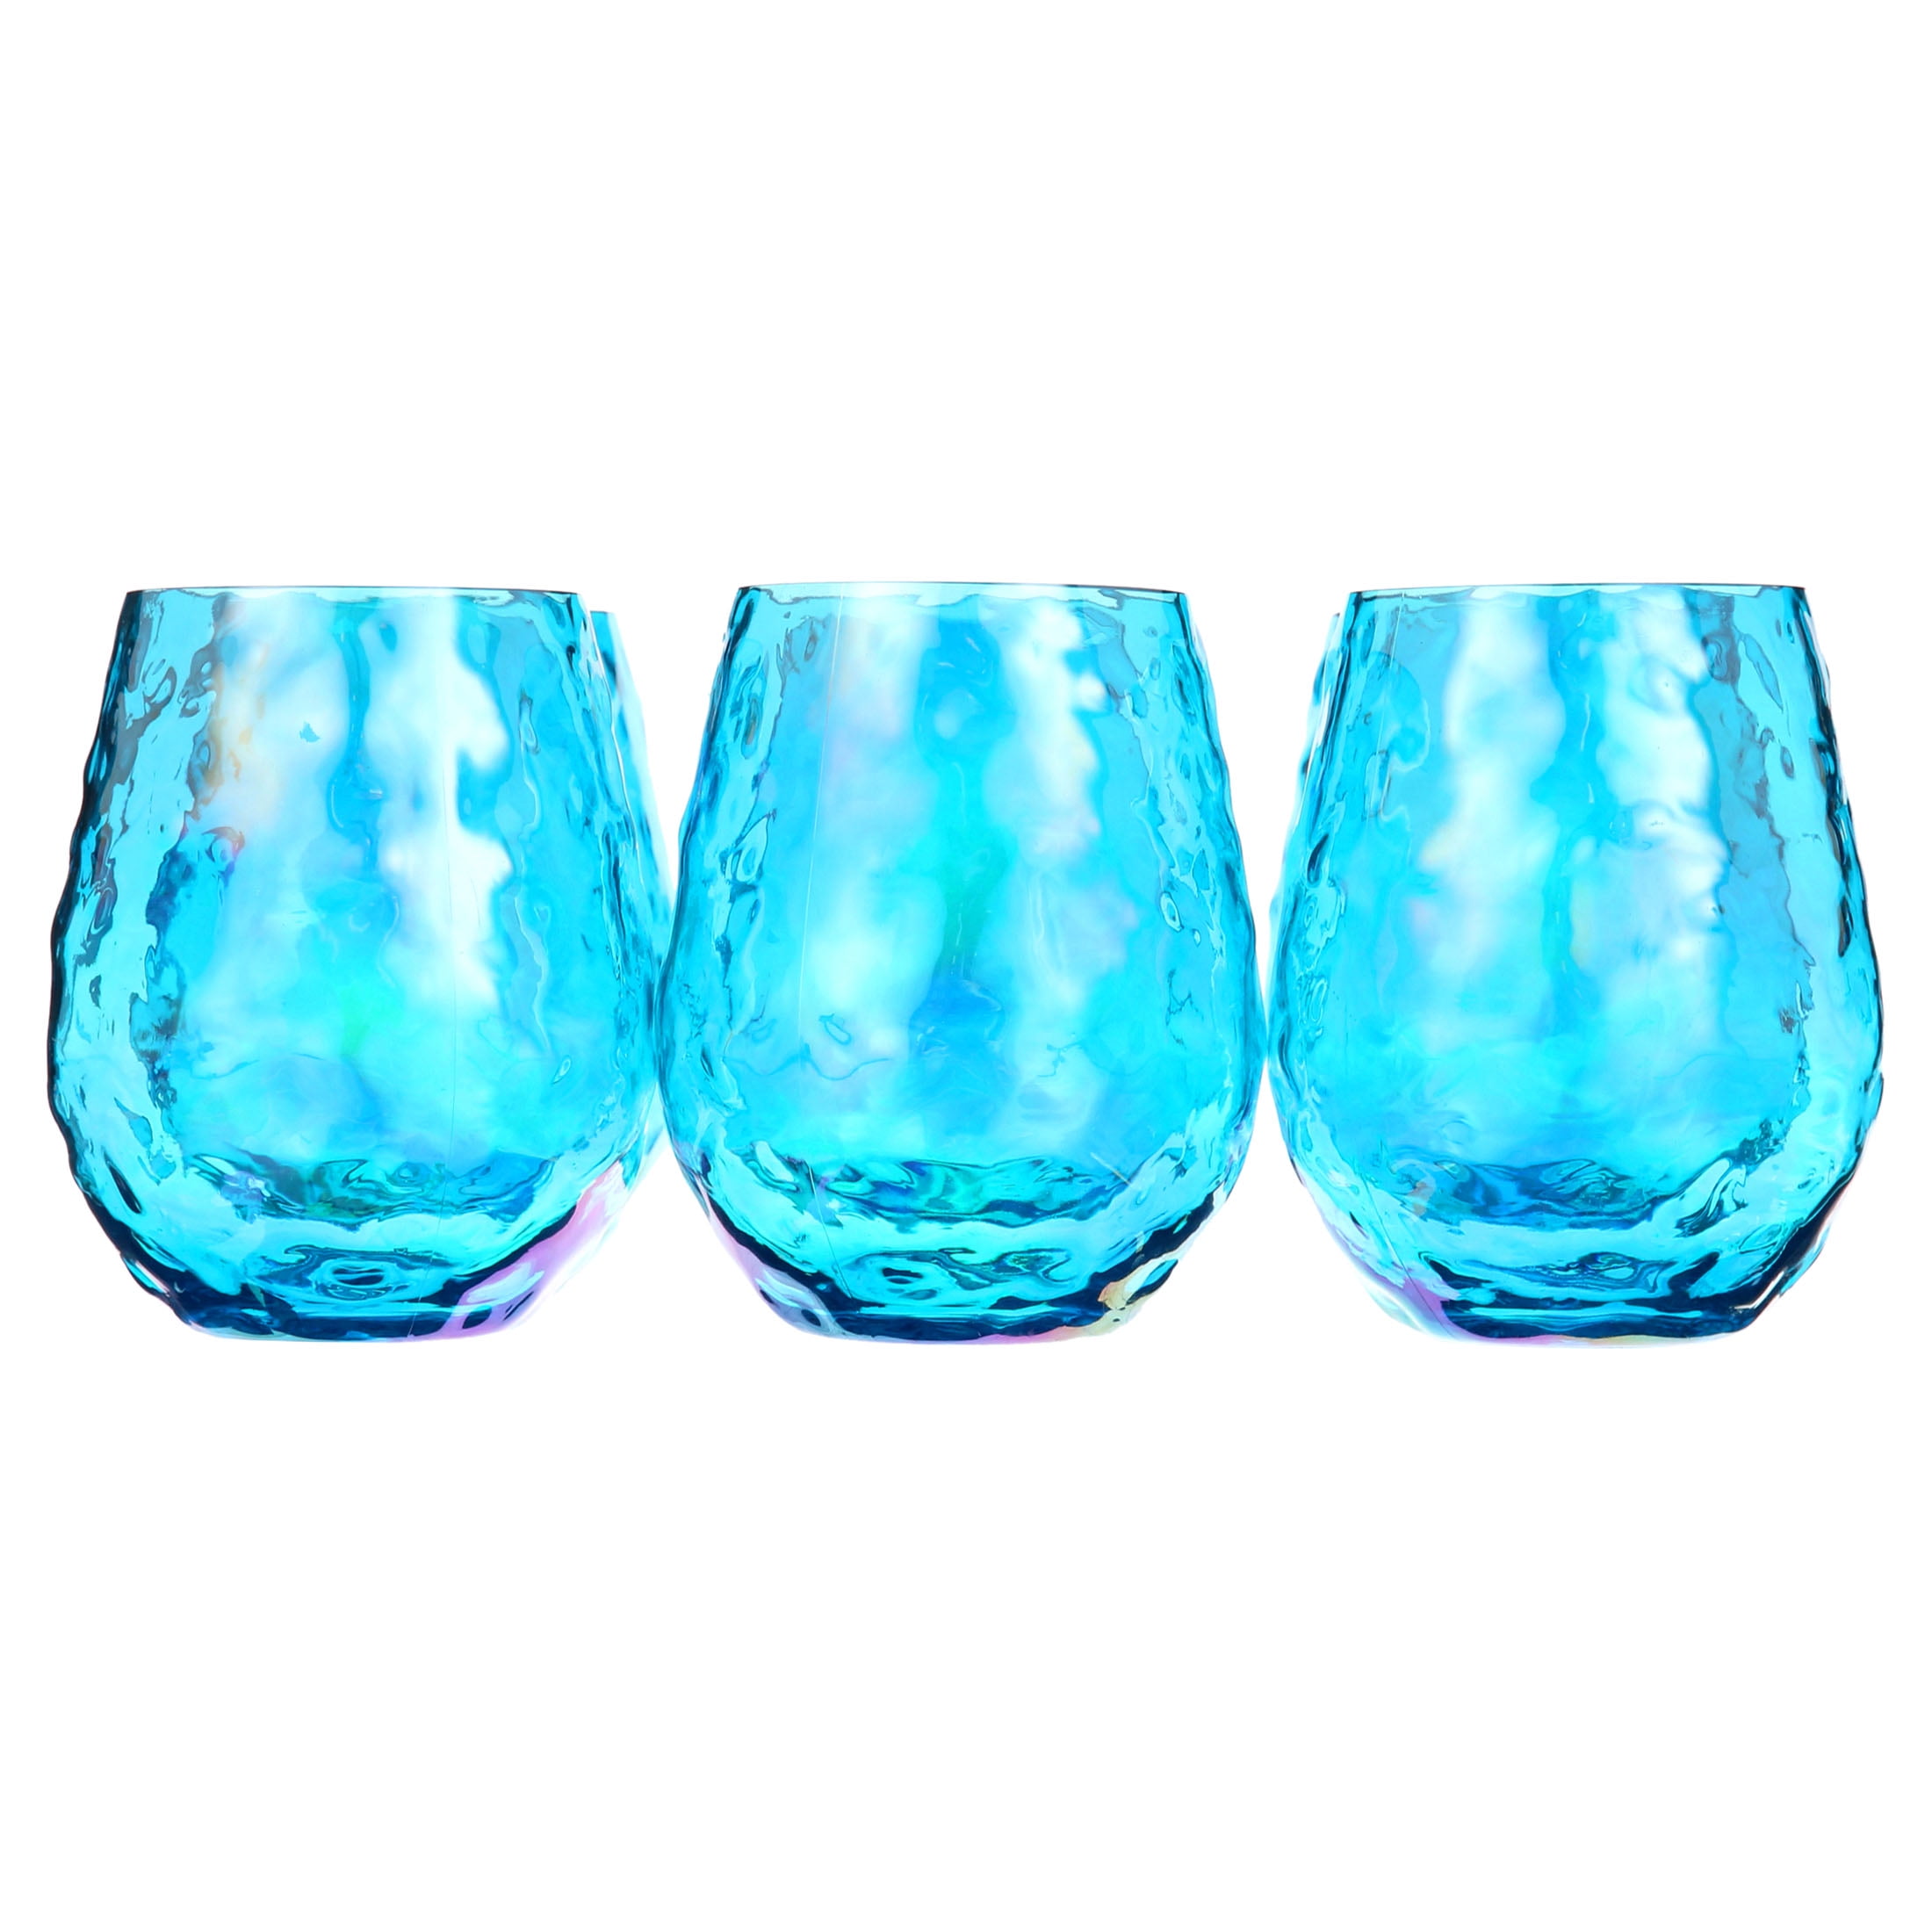 Better Homes & Gardens Clear Flared Stemless Wine Glass, 4 Pack